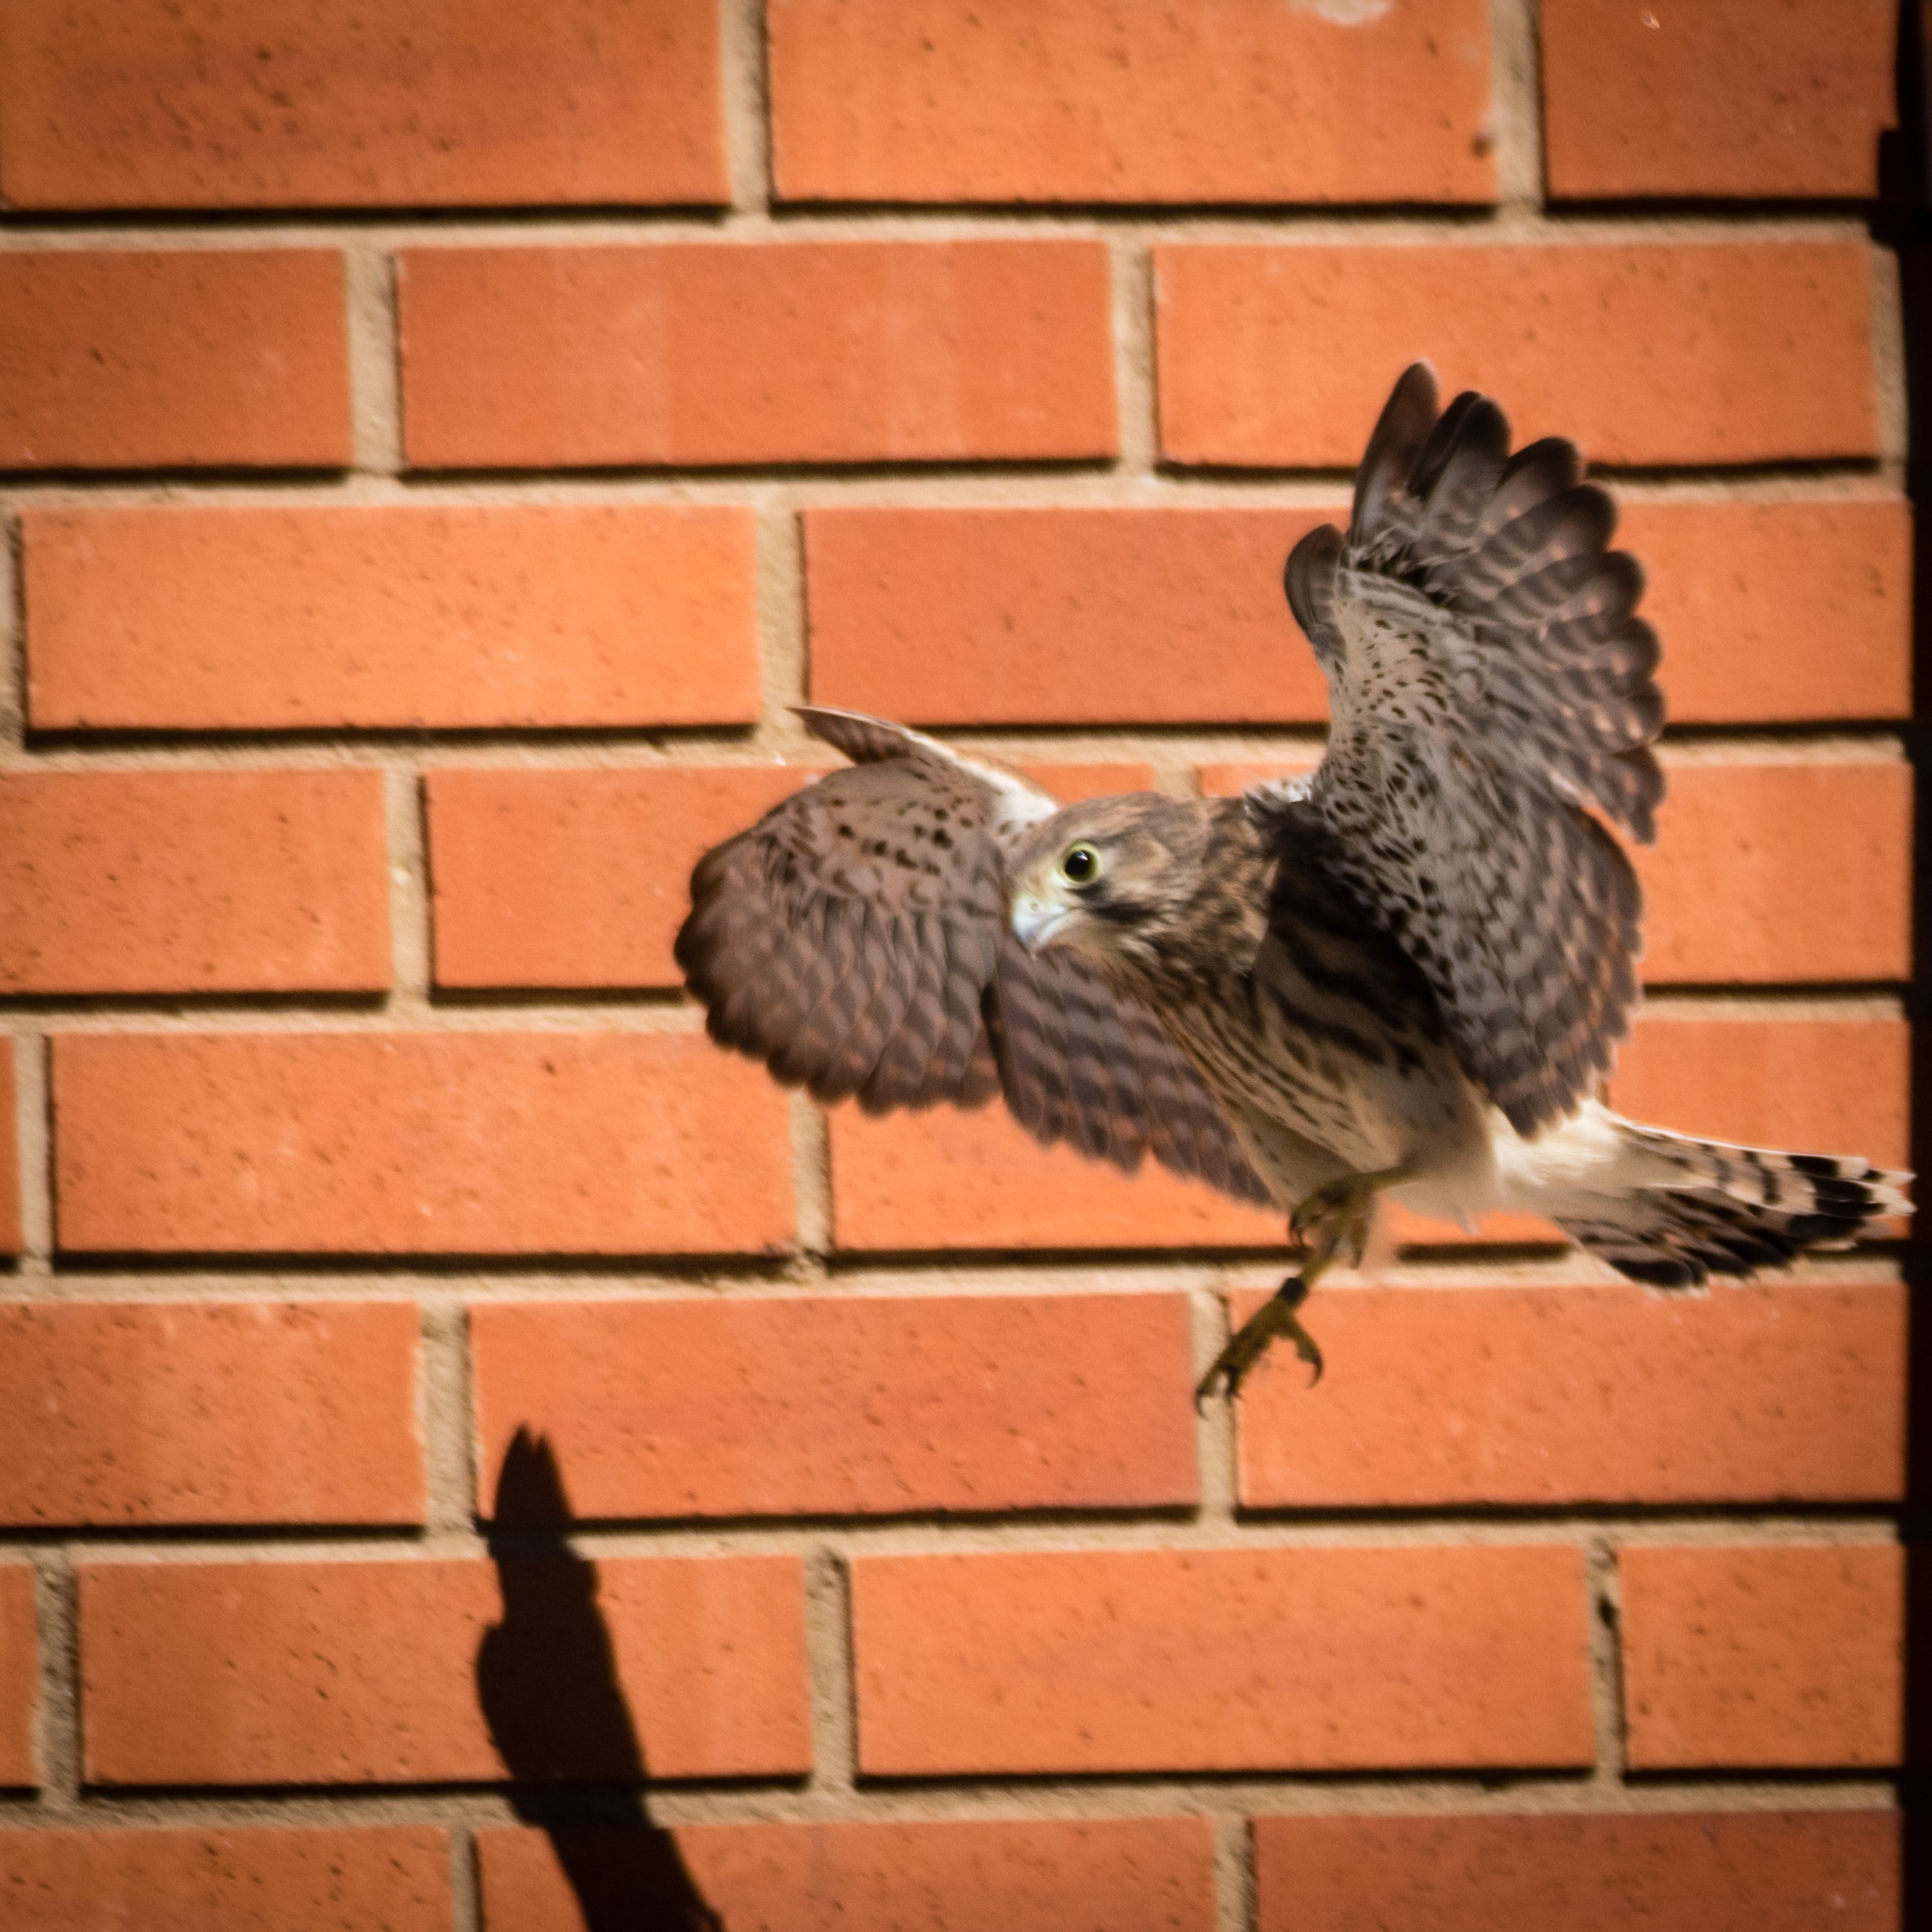 Pictured is a kestrel chick in flight. Images courtesy of Mark McCall Photography (www.markjsmccall.com).